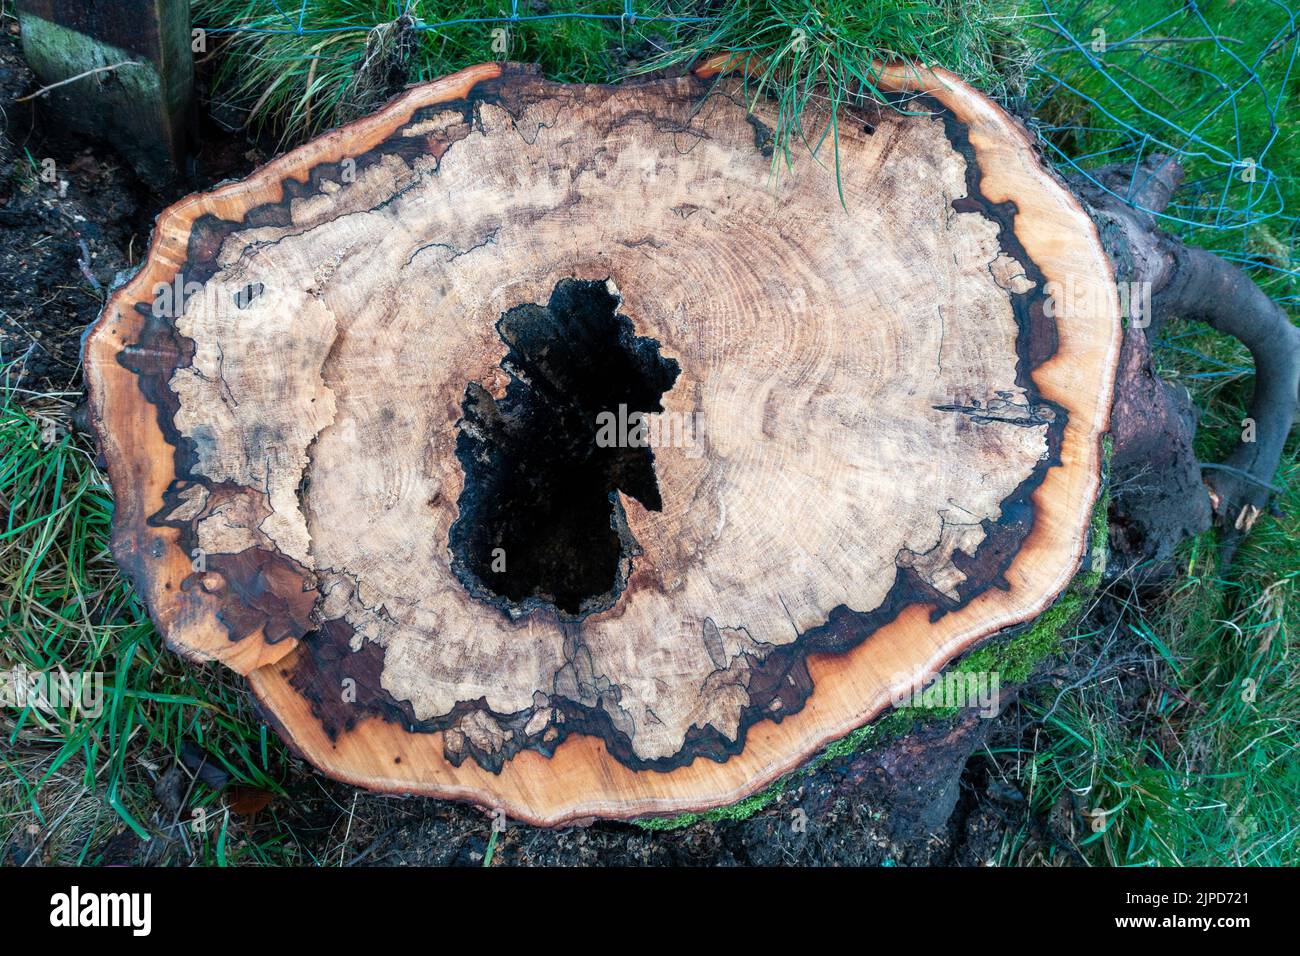 Spalting effect in a sawn tree showing zone lines in the stump, Yorkshire, UK Stock Photo